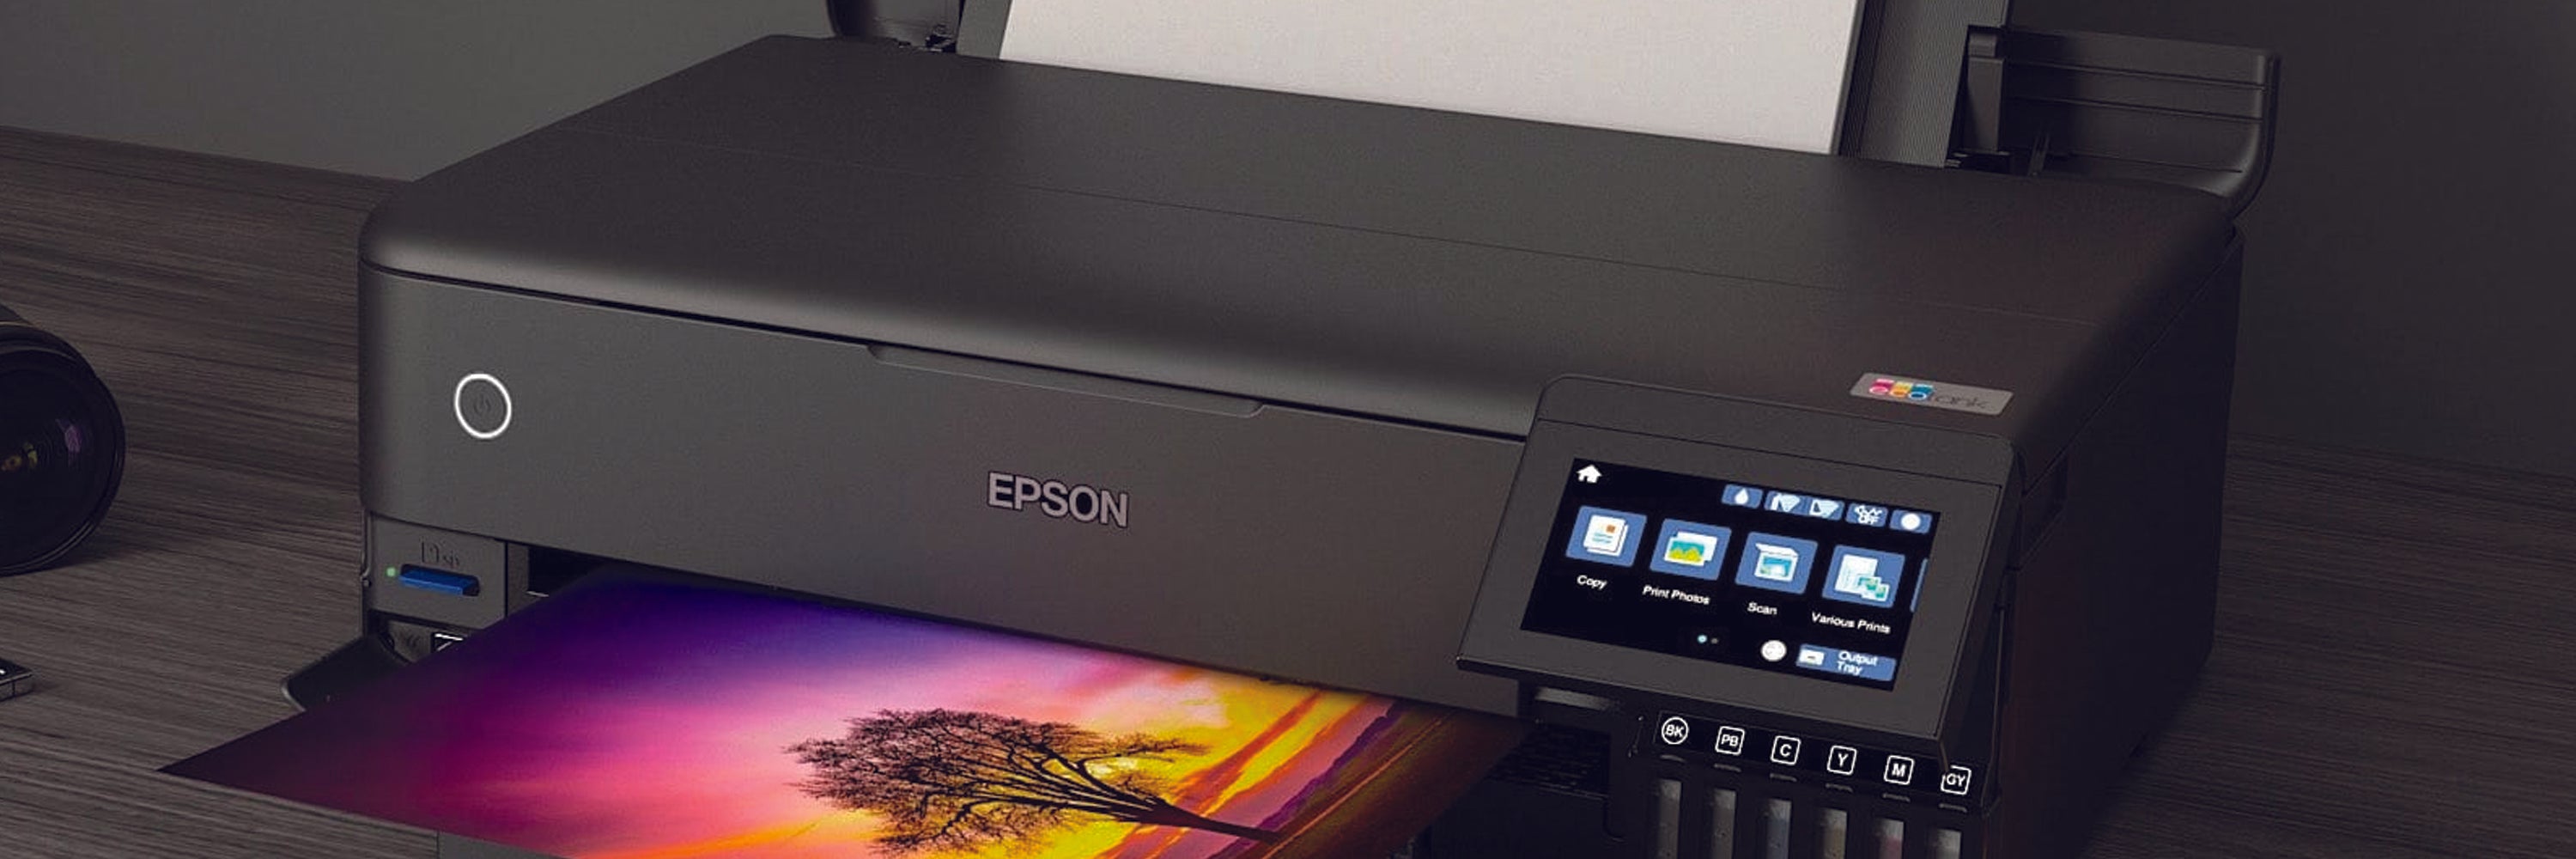 Expression XP-2150, Consumer, Inkjet Printers, Printers, Products